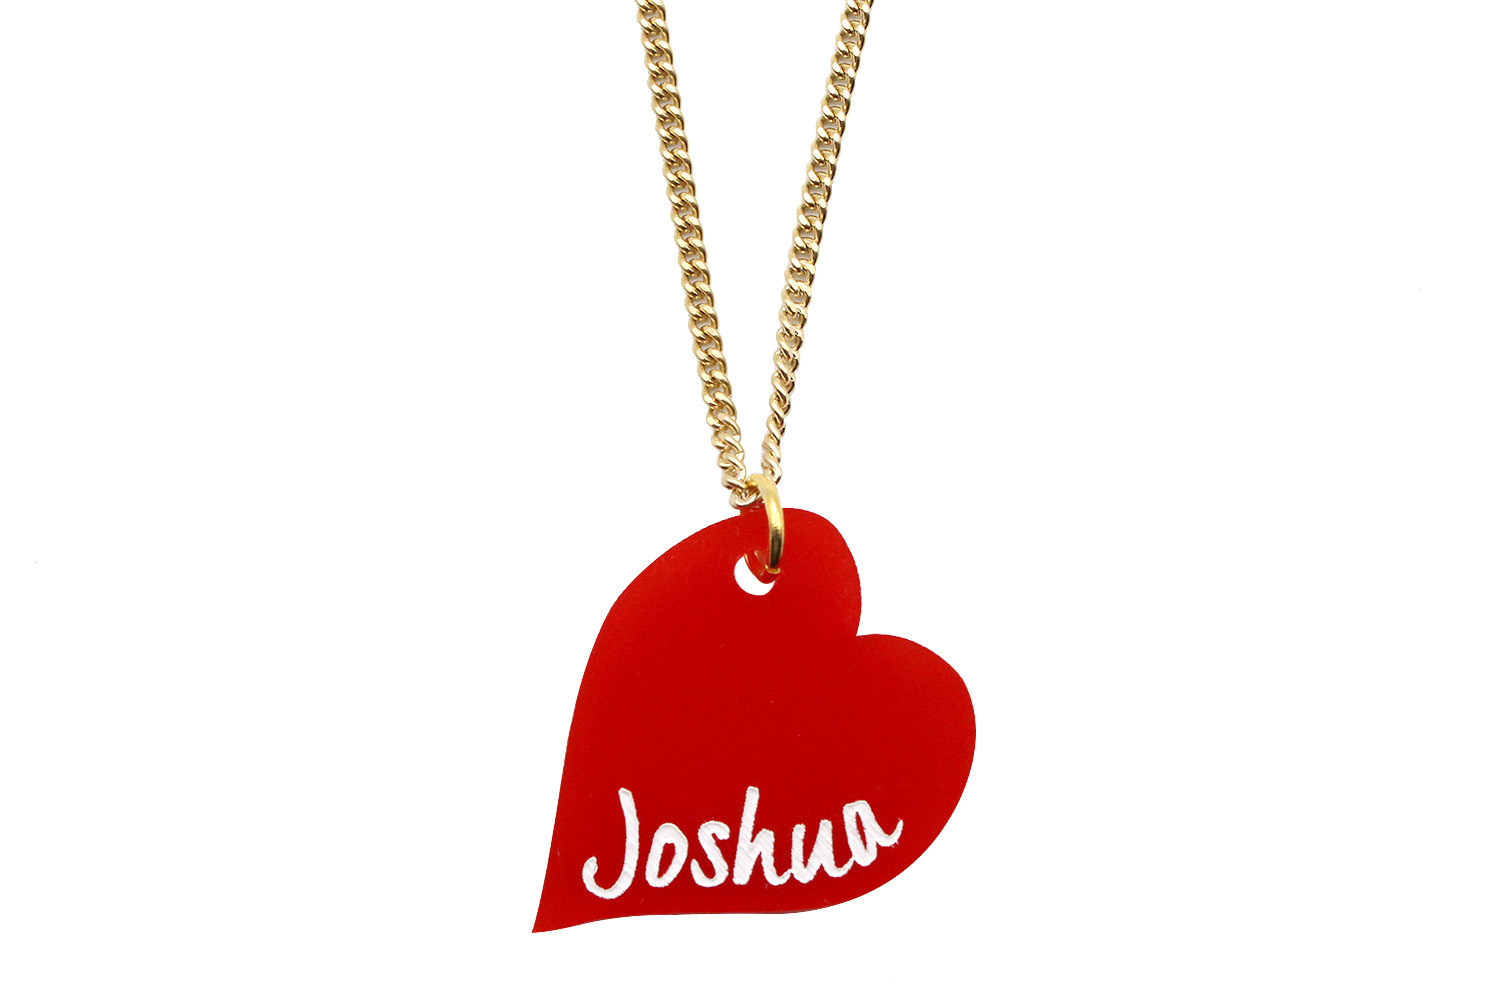 Personalized Heart Shaped Pendant with Name on Chain Necklace